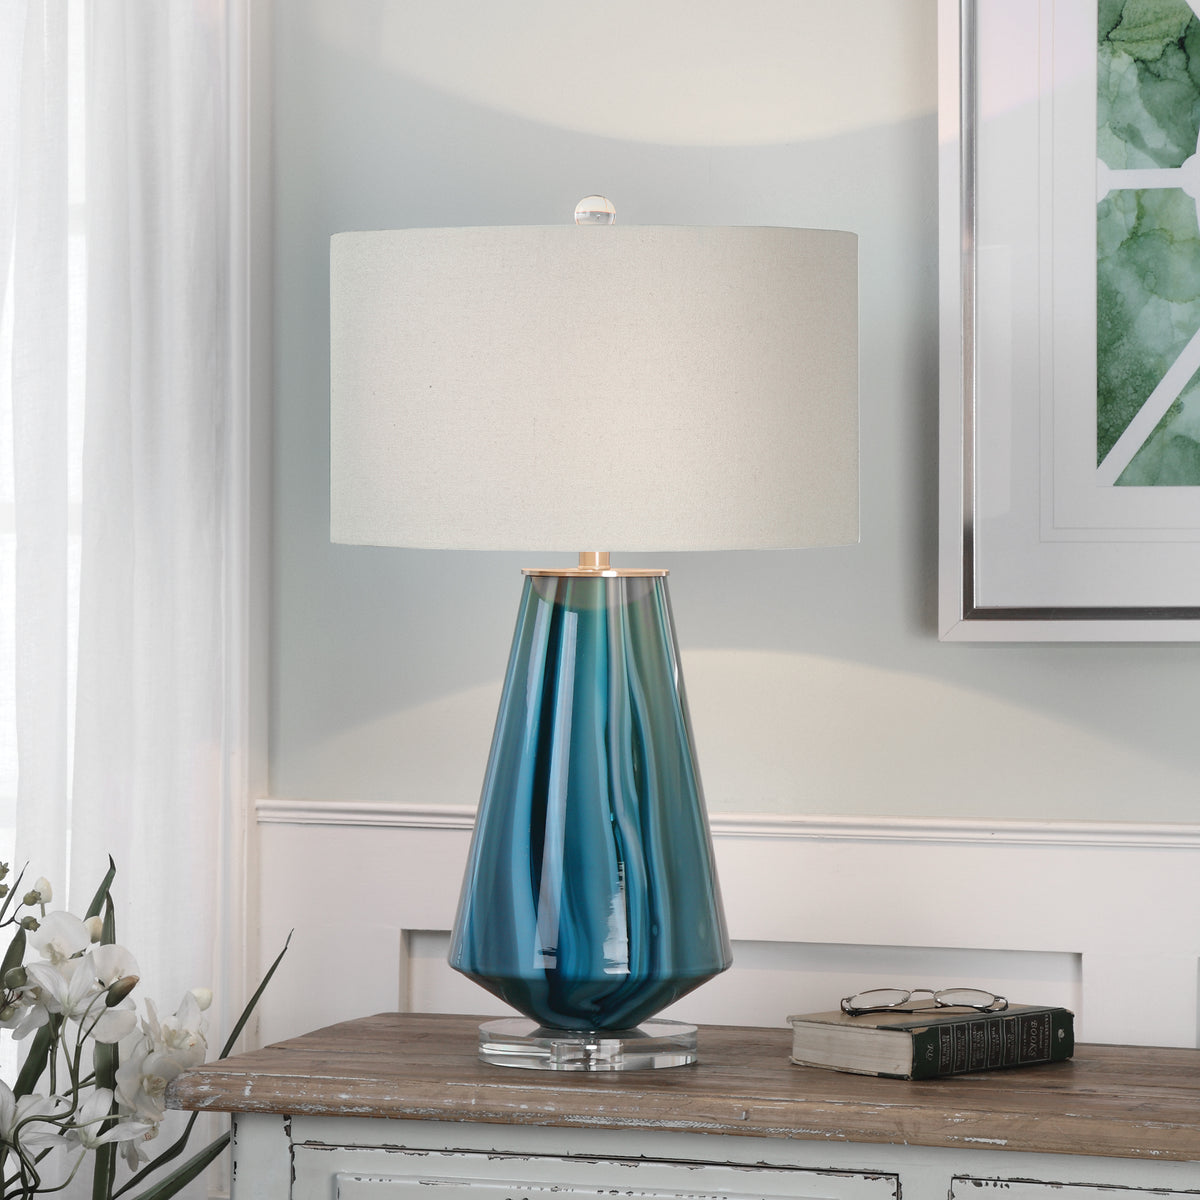 Uttermost Pescara Teal-Gray Glass Lamp